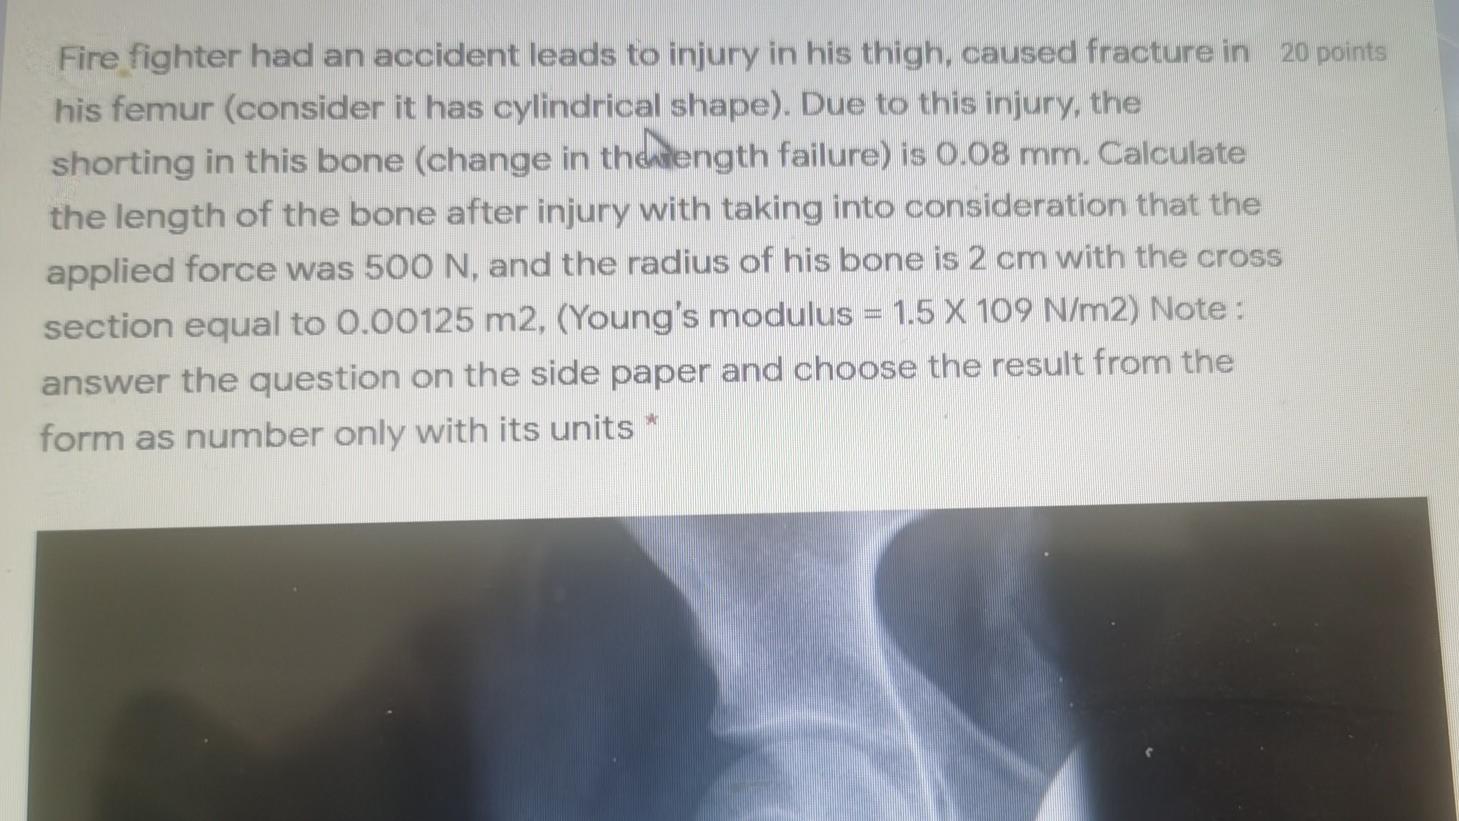 Fire fighter had an accident leads to injury in his thigh, caused fracture in 20 points his femur (consider it has cylindrica